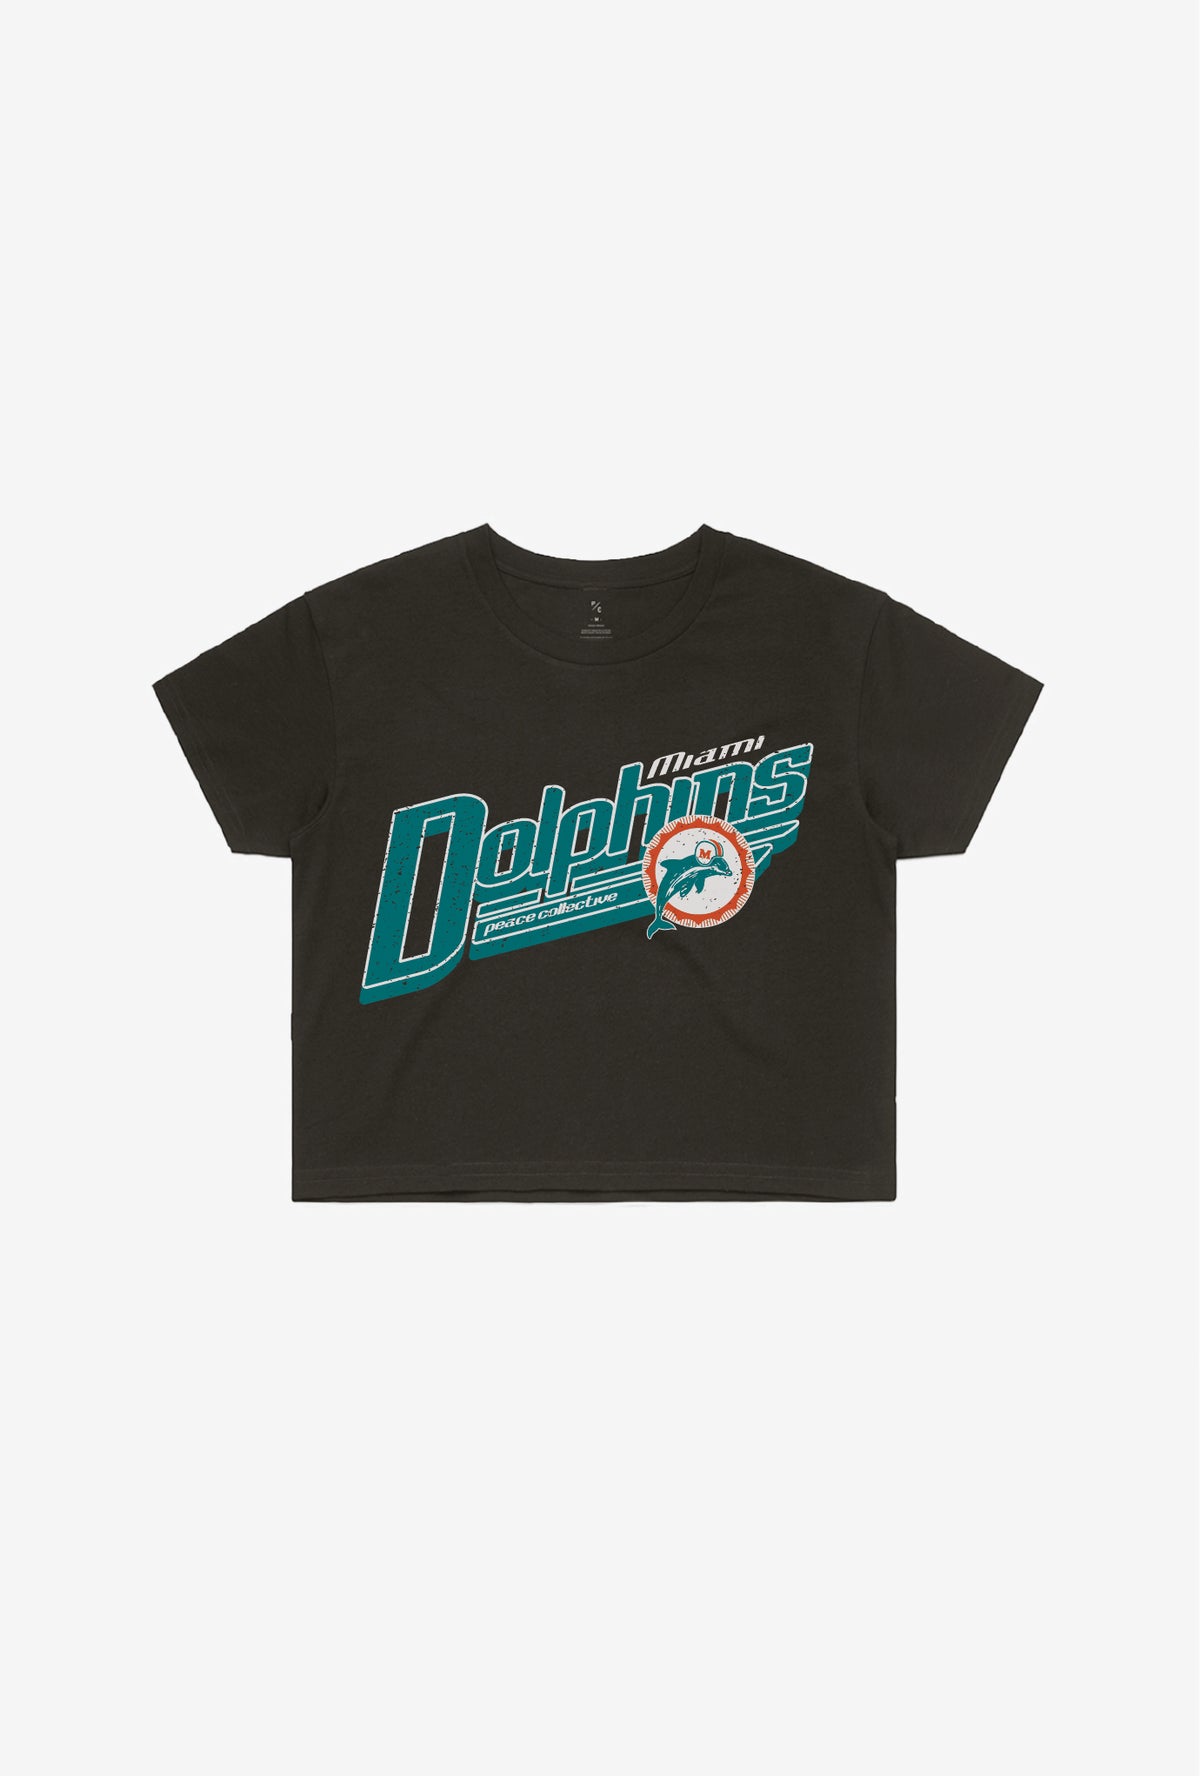 Miami Dolphins Vintage Cropped T-Shirt - Black